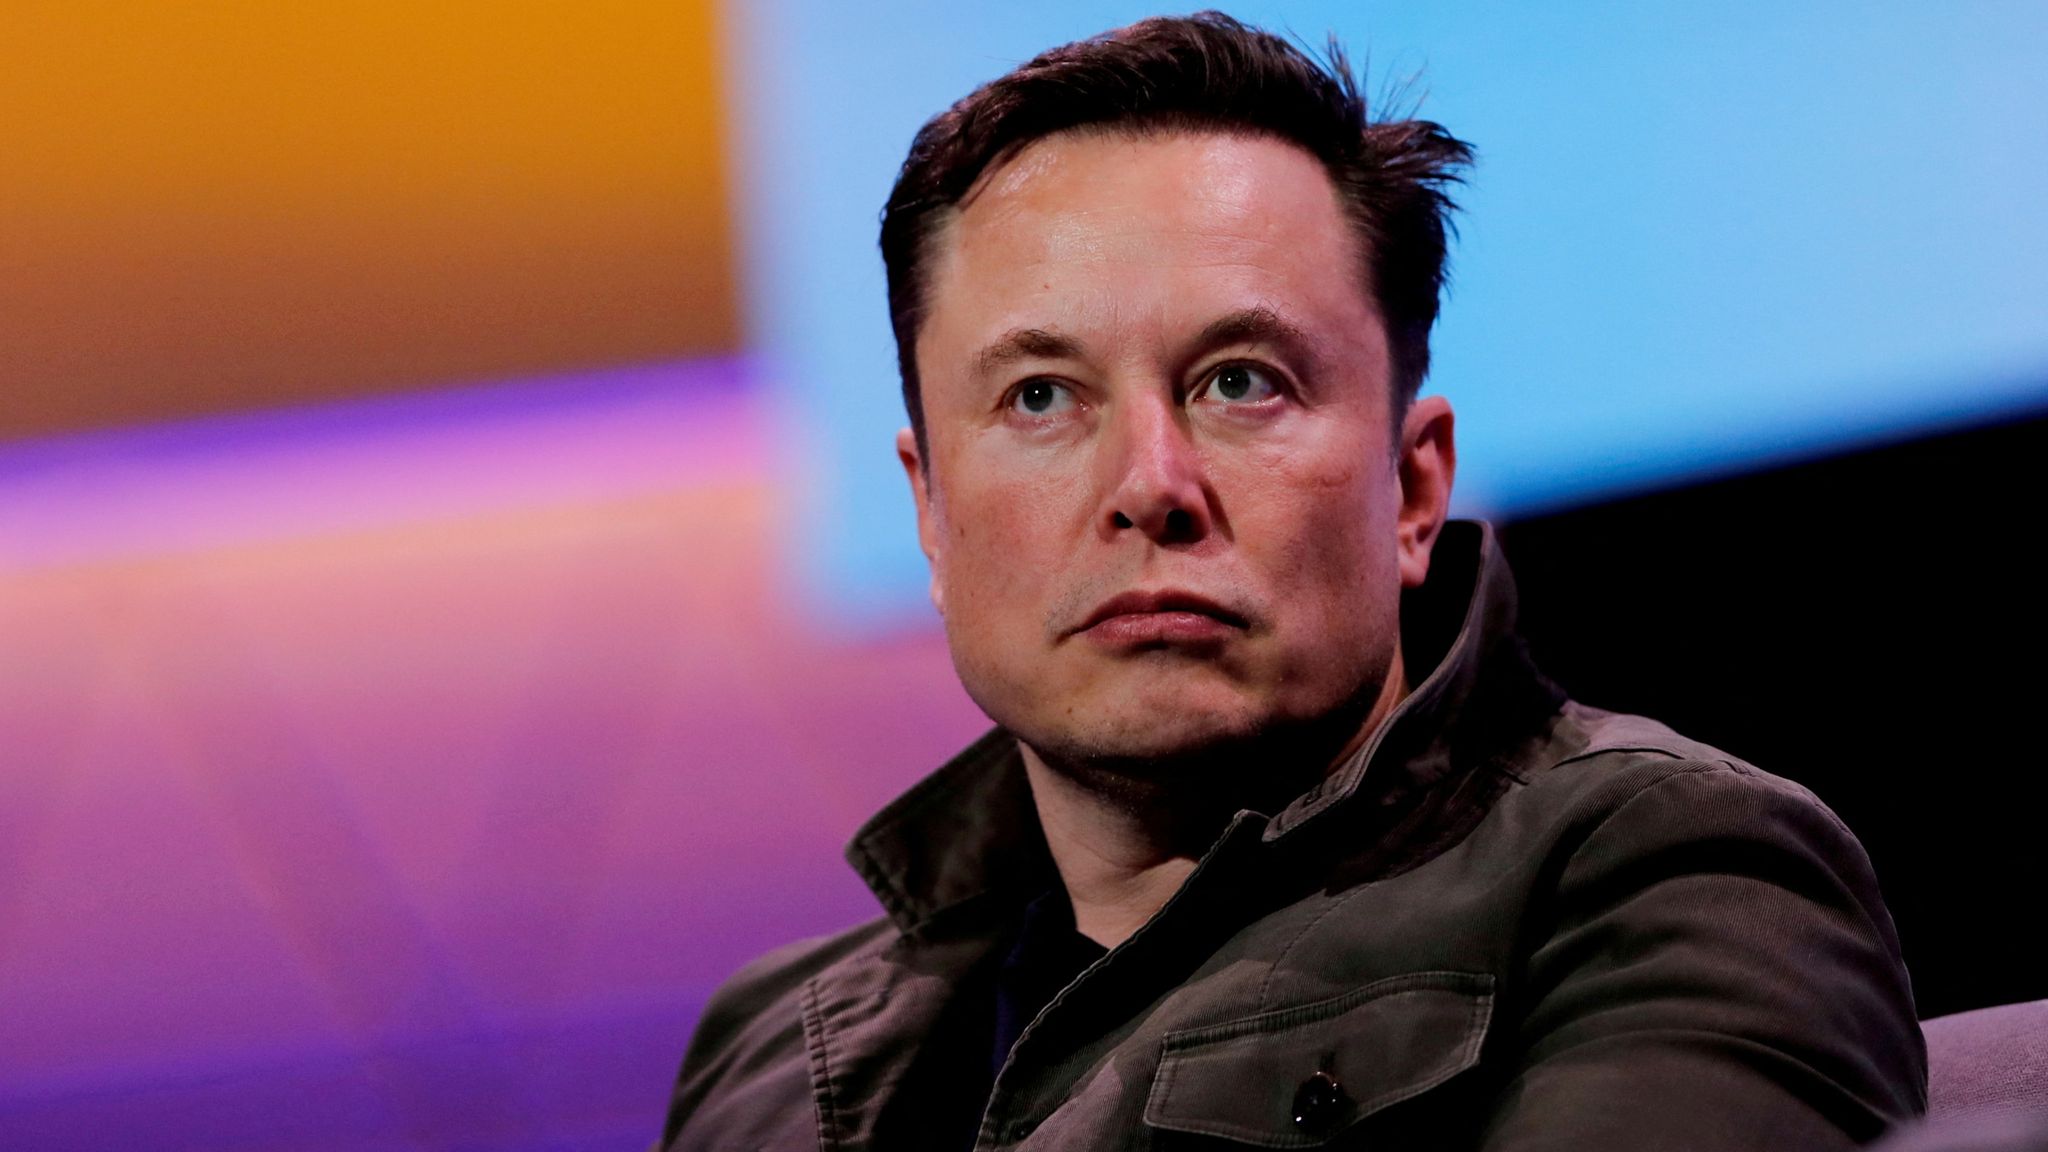 Elon Musk warned by European Union that Twitter could be banned unless he sticks to bloc's digital rules | Science & Tech News | Sky News